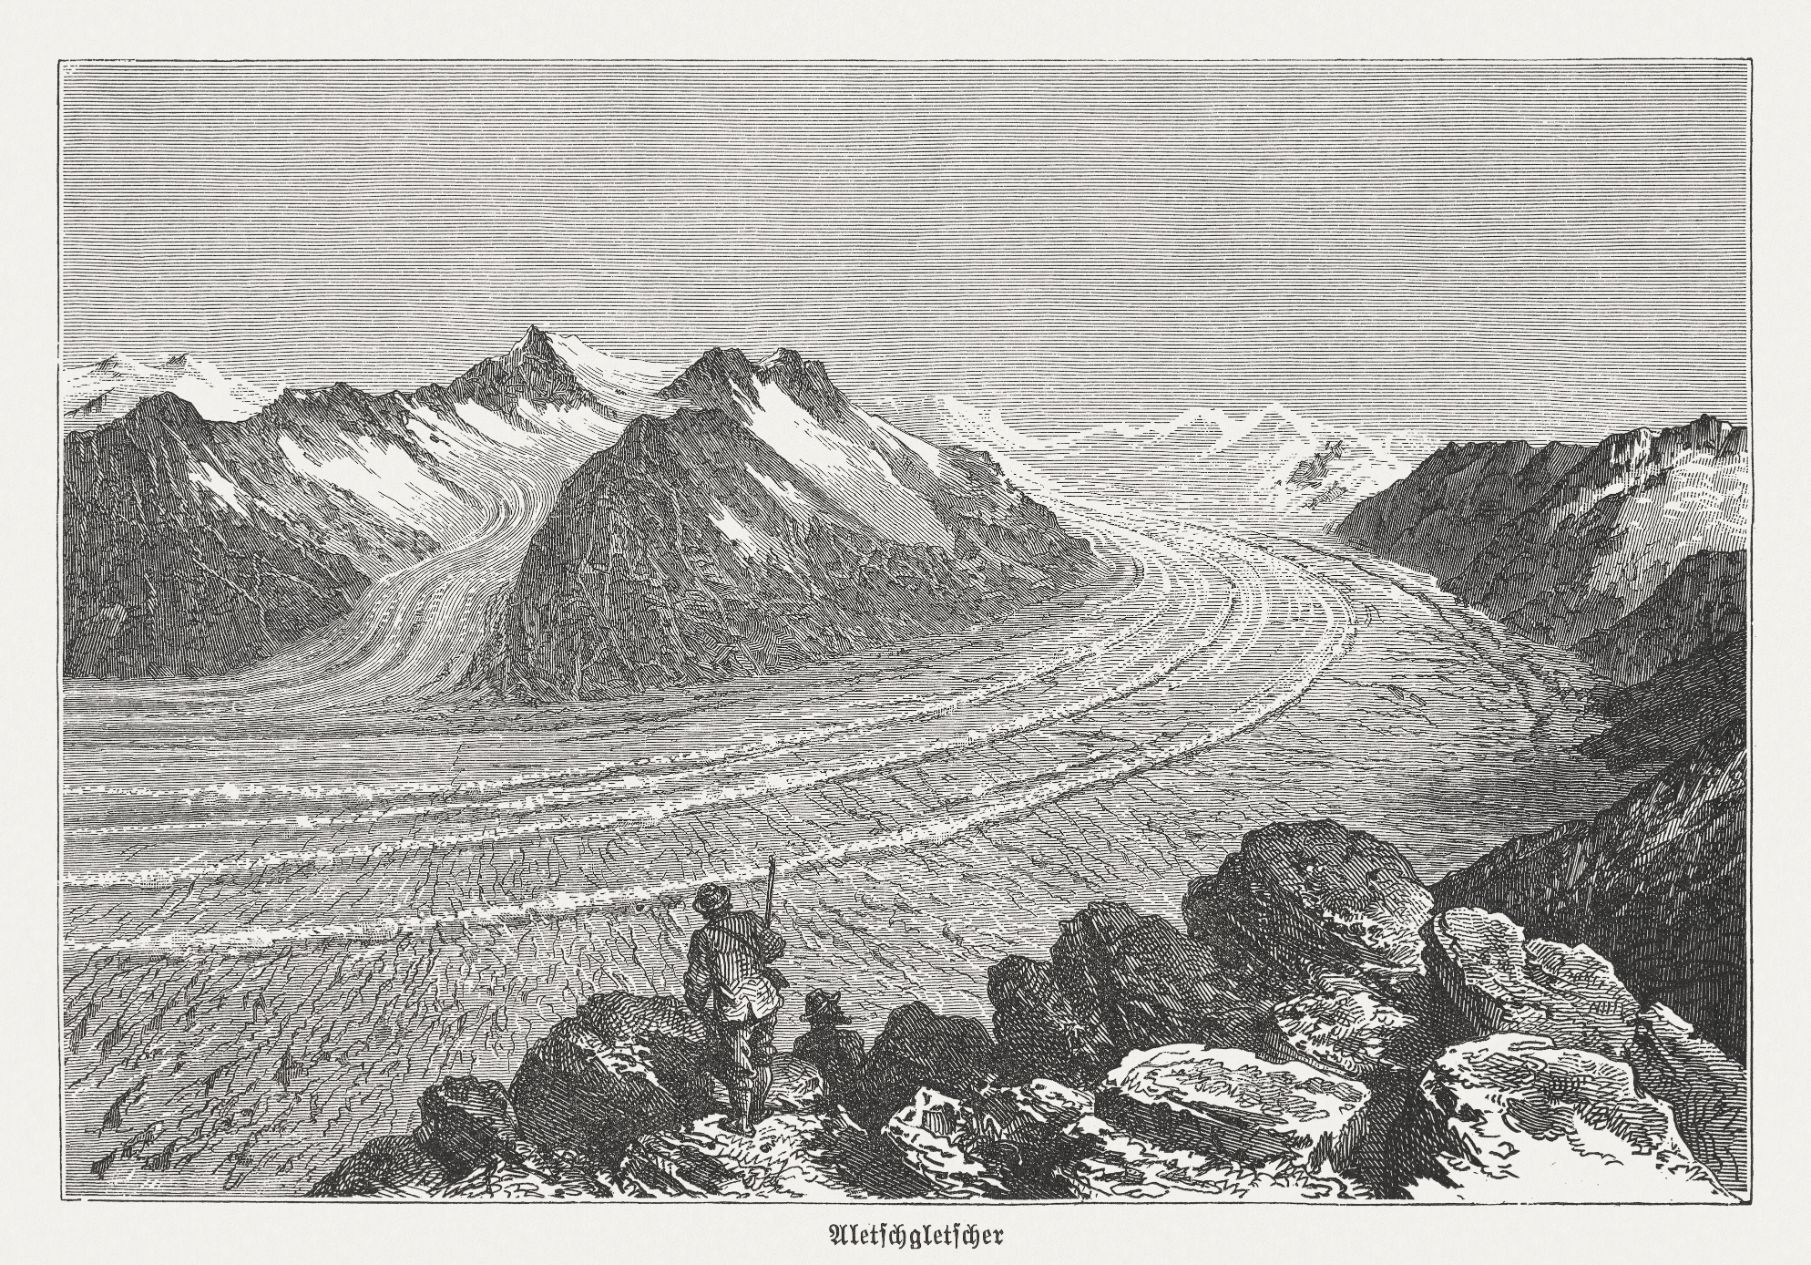 The UNESCO-protected Aletsch Glacier in Switzerland in 1882. Compared to current photographs you can see the immense decline in ice. Illustration: Getty